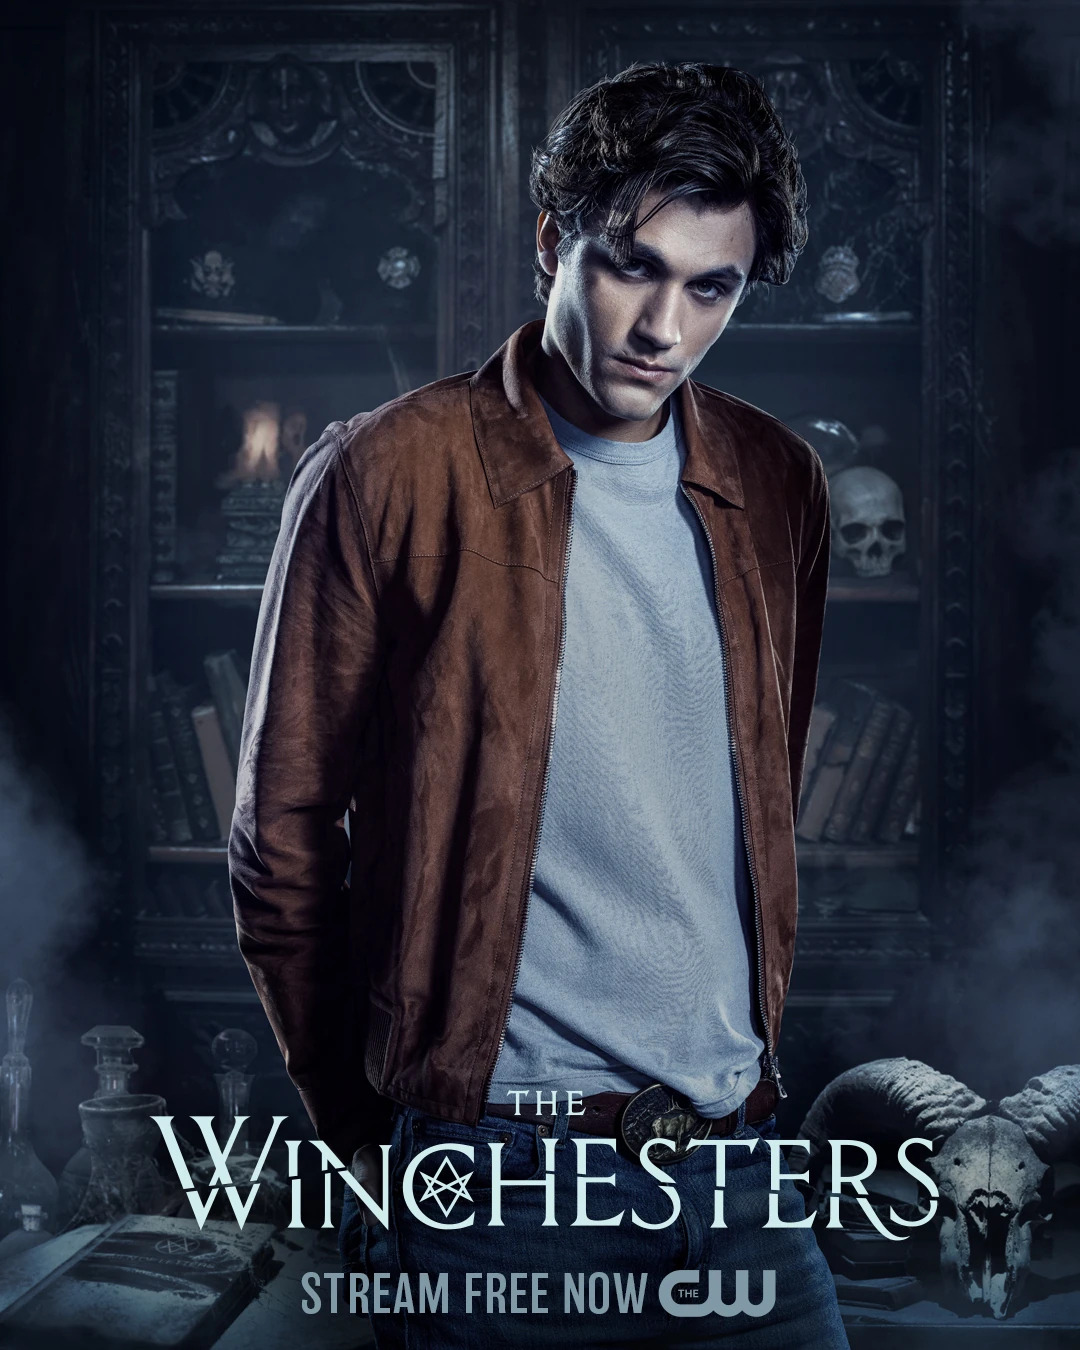 Extra Large TV Poster Image for The Winchesters (#8 of 11)